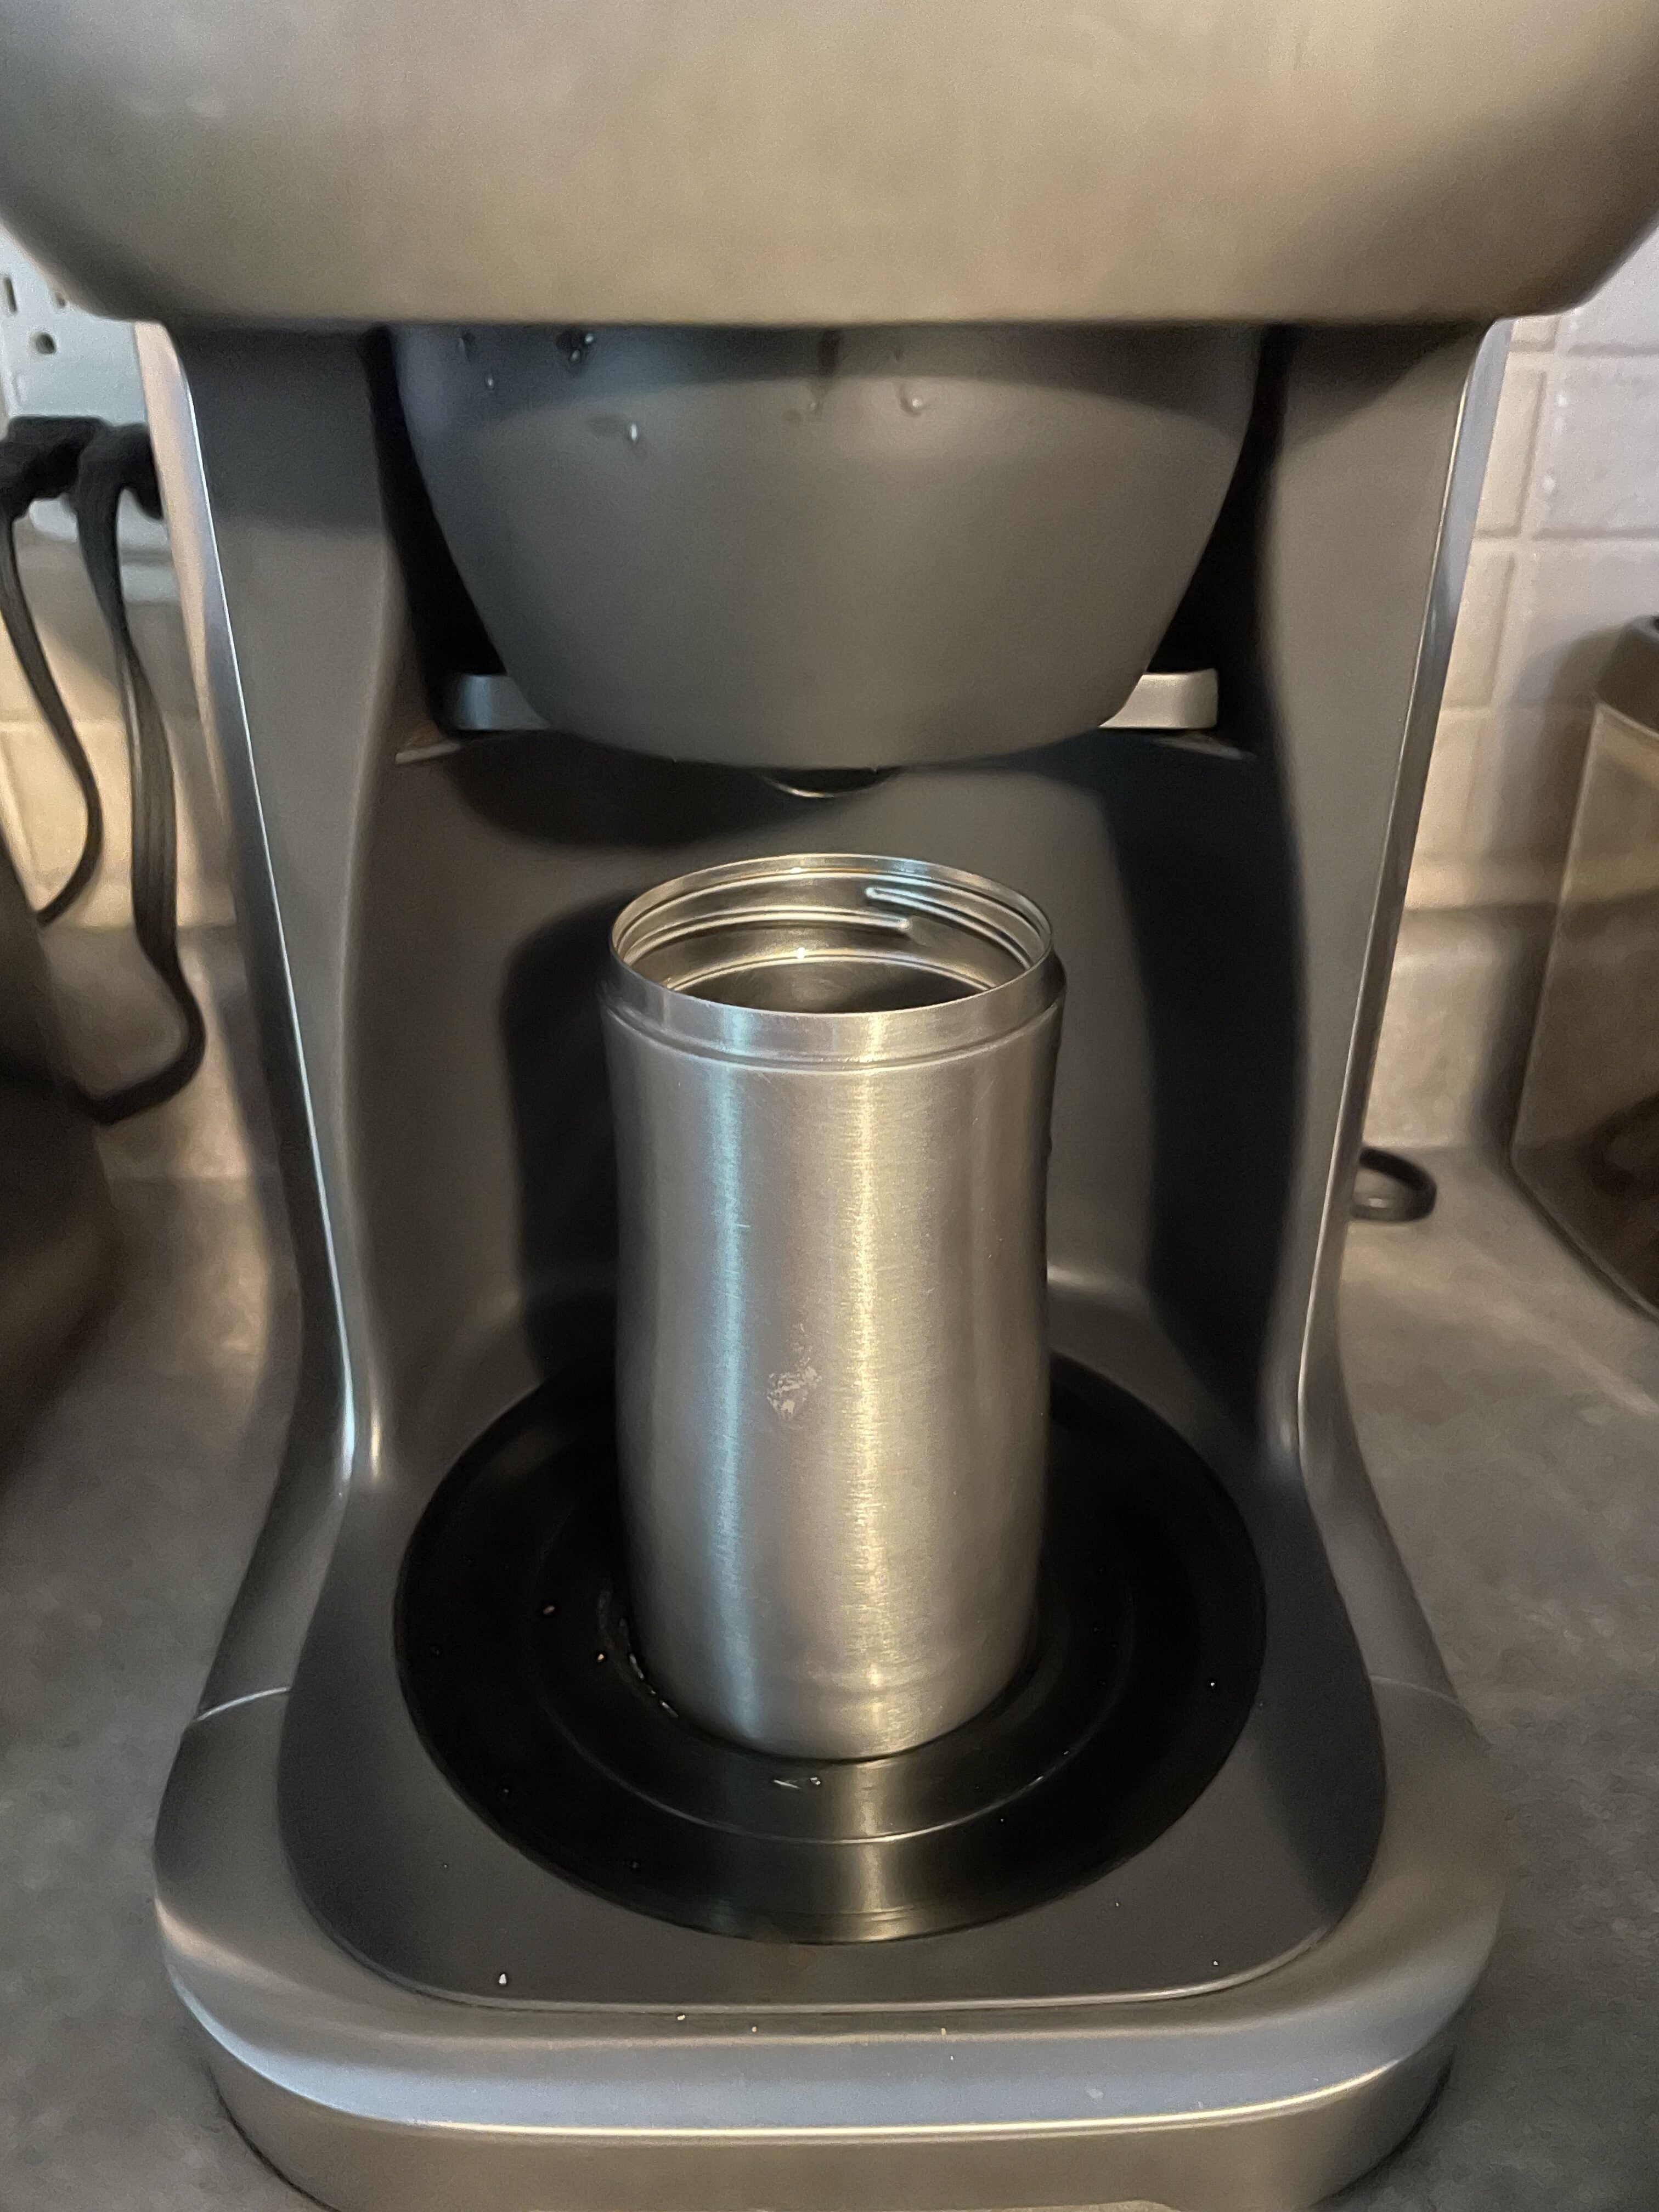 Bed Bath And Beyond] Breville Grind Control Coffee Maker 287.99+tax -  RedFlagDeals.com Forums